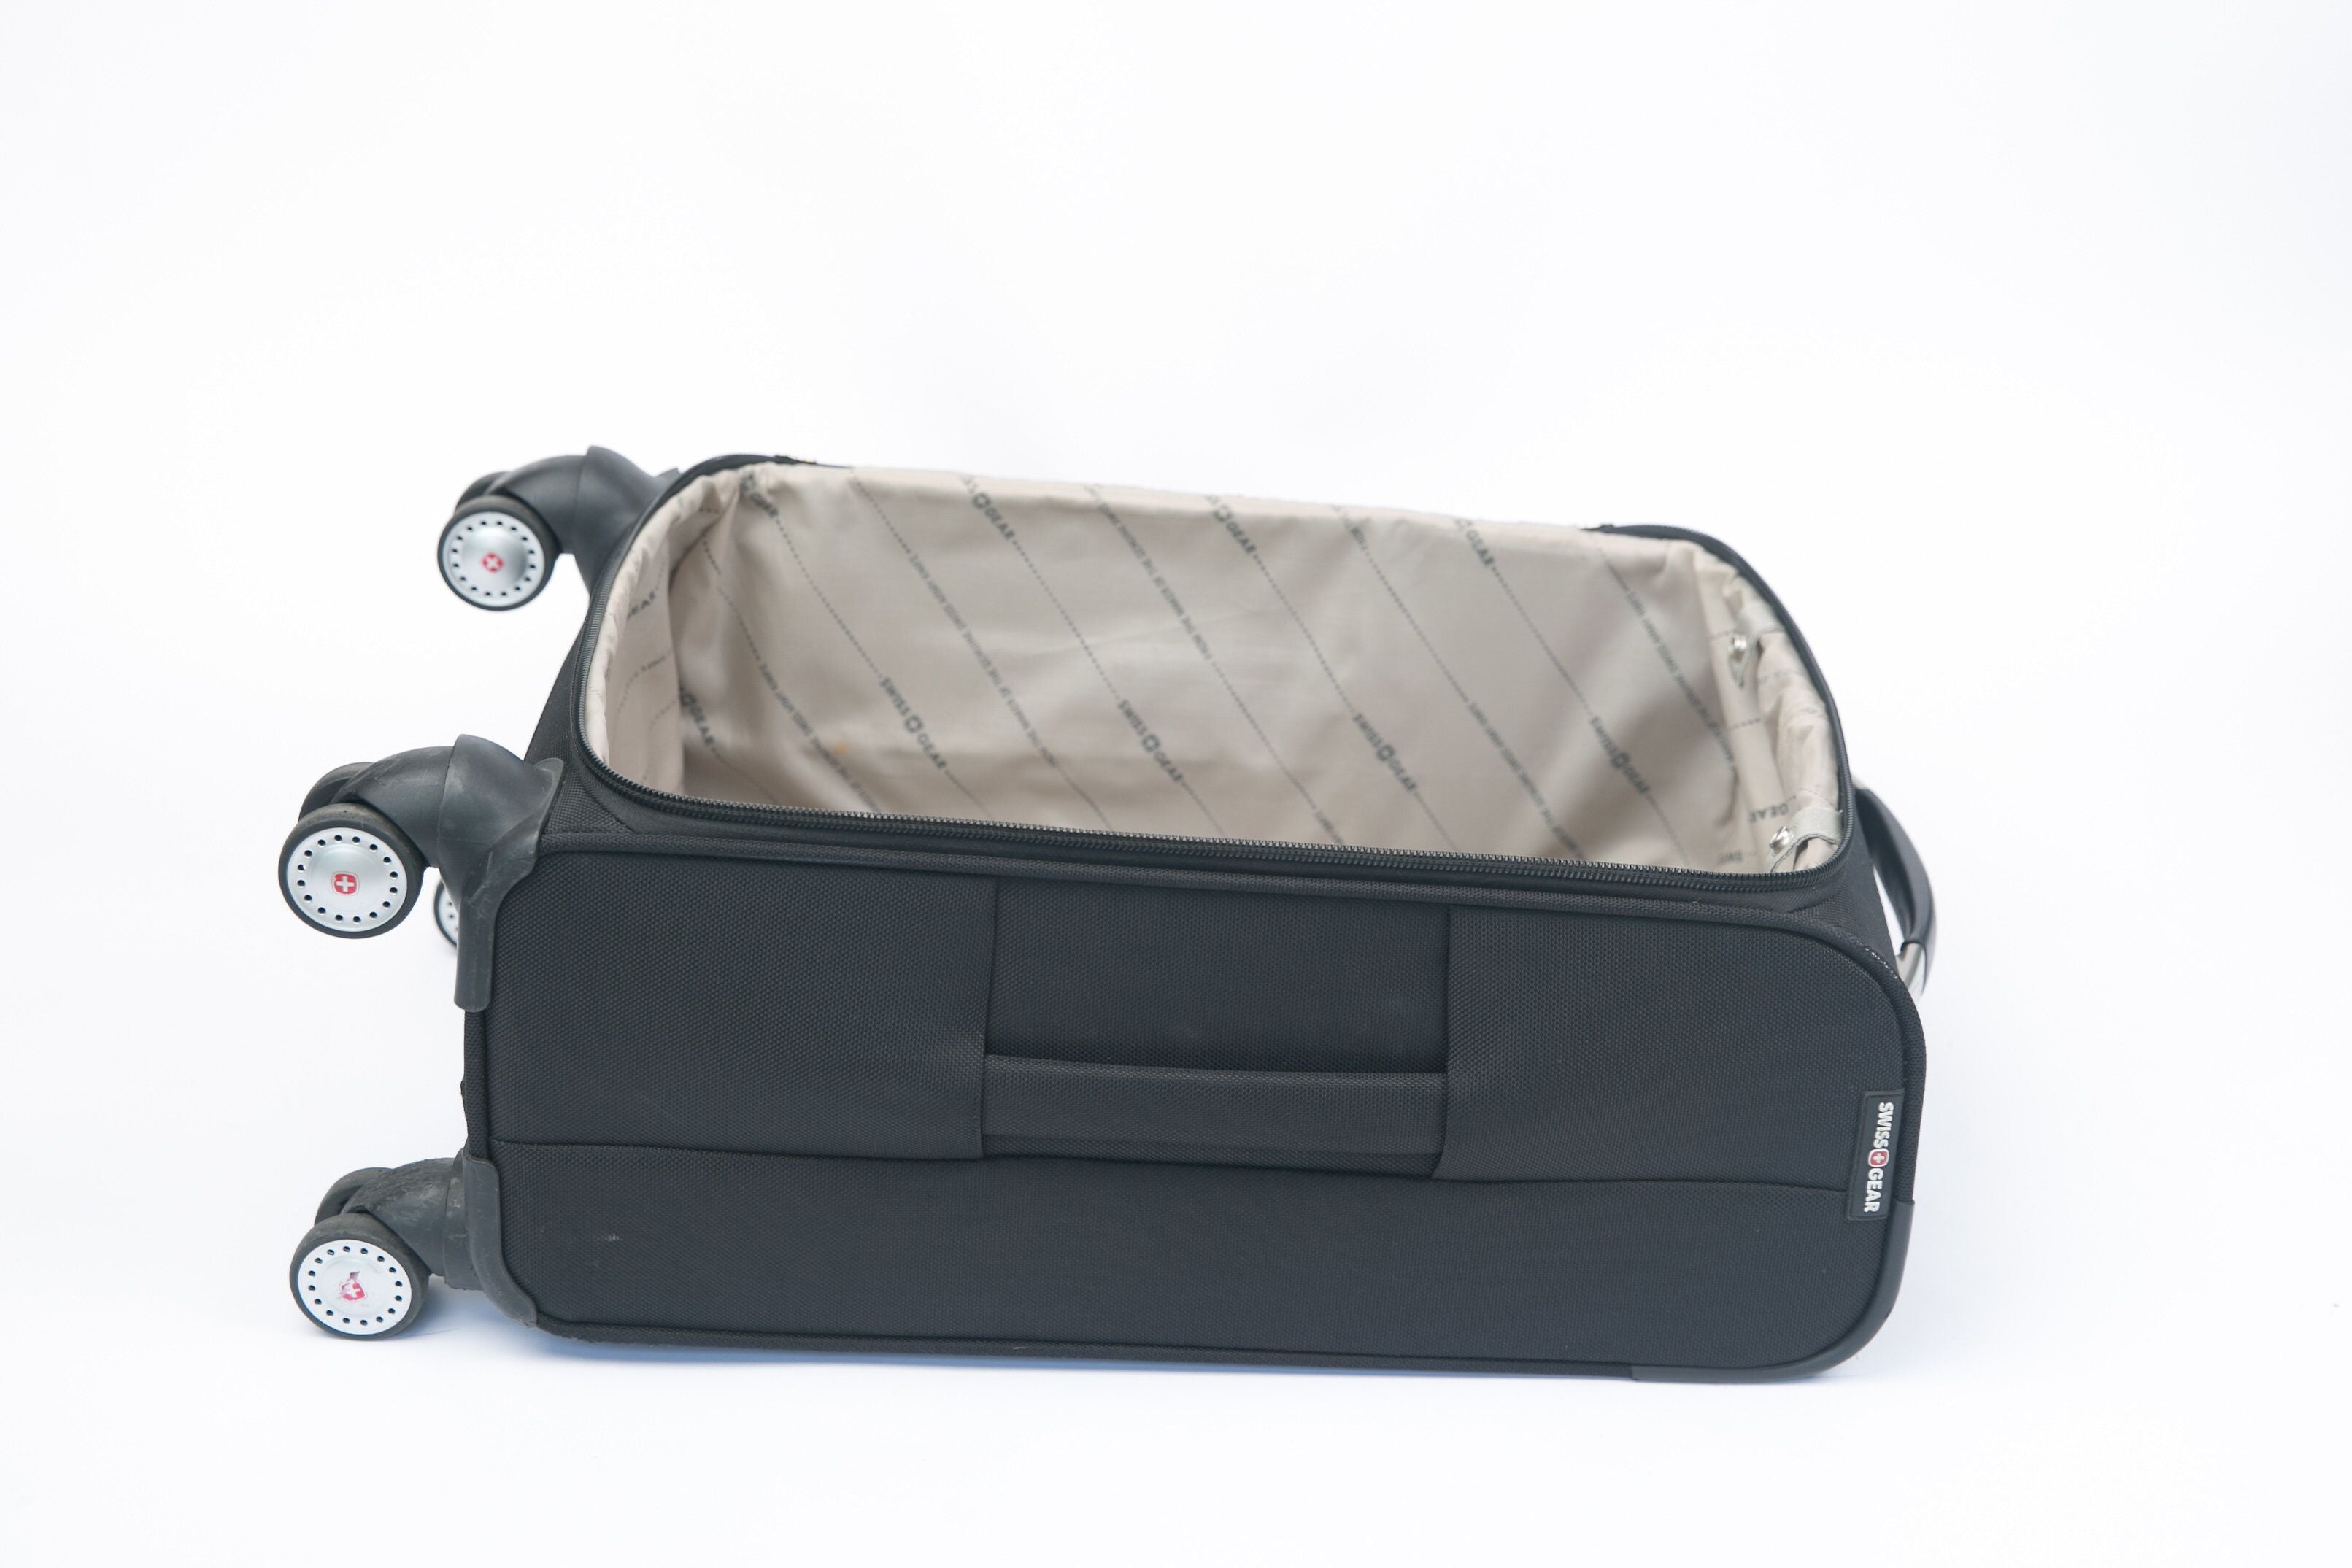 Durable suitcase for travel